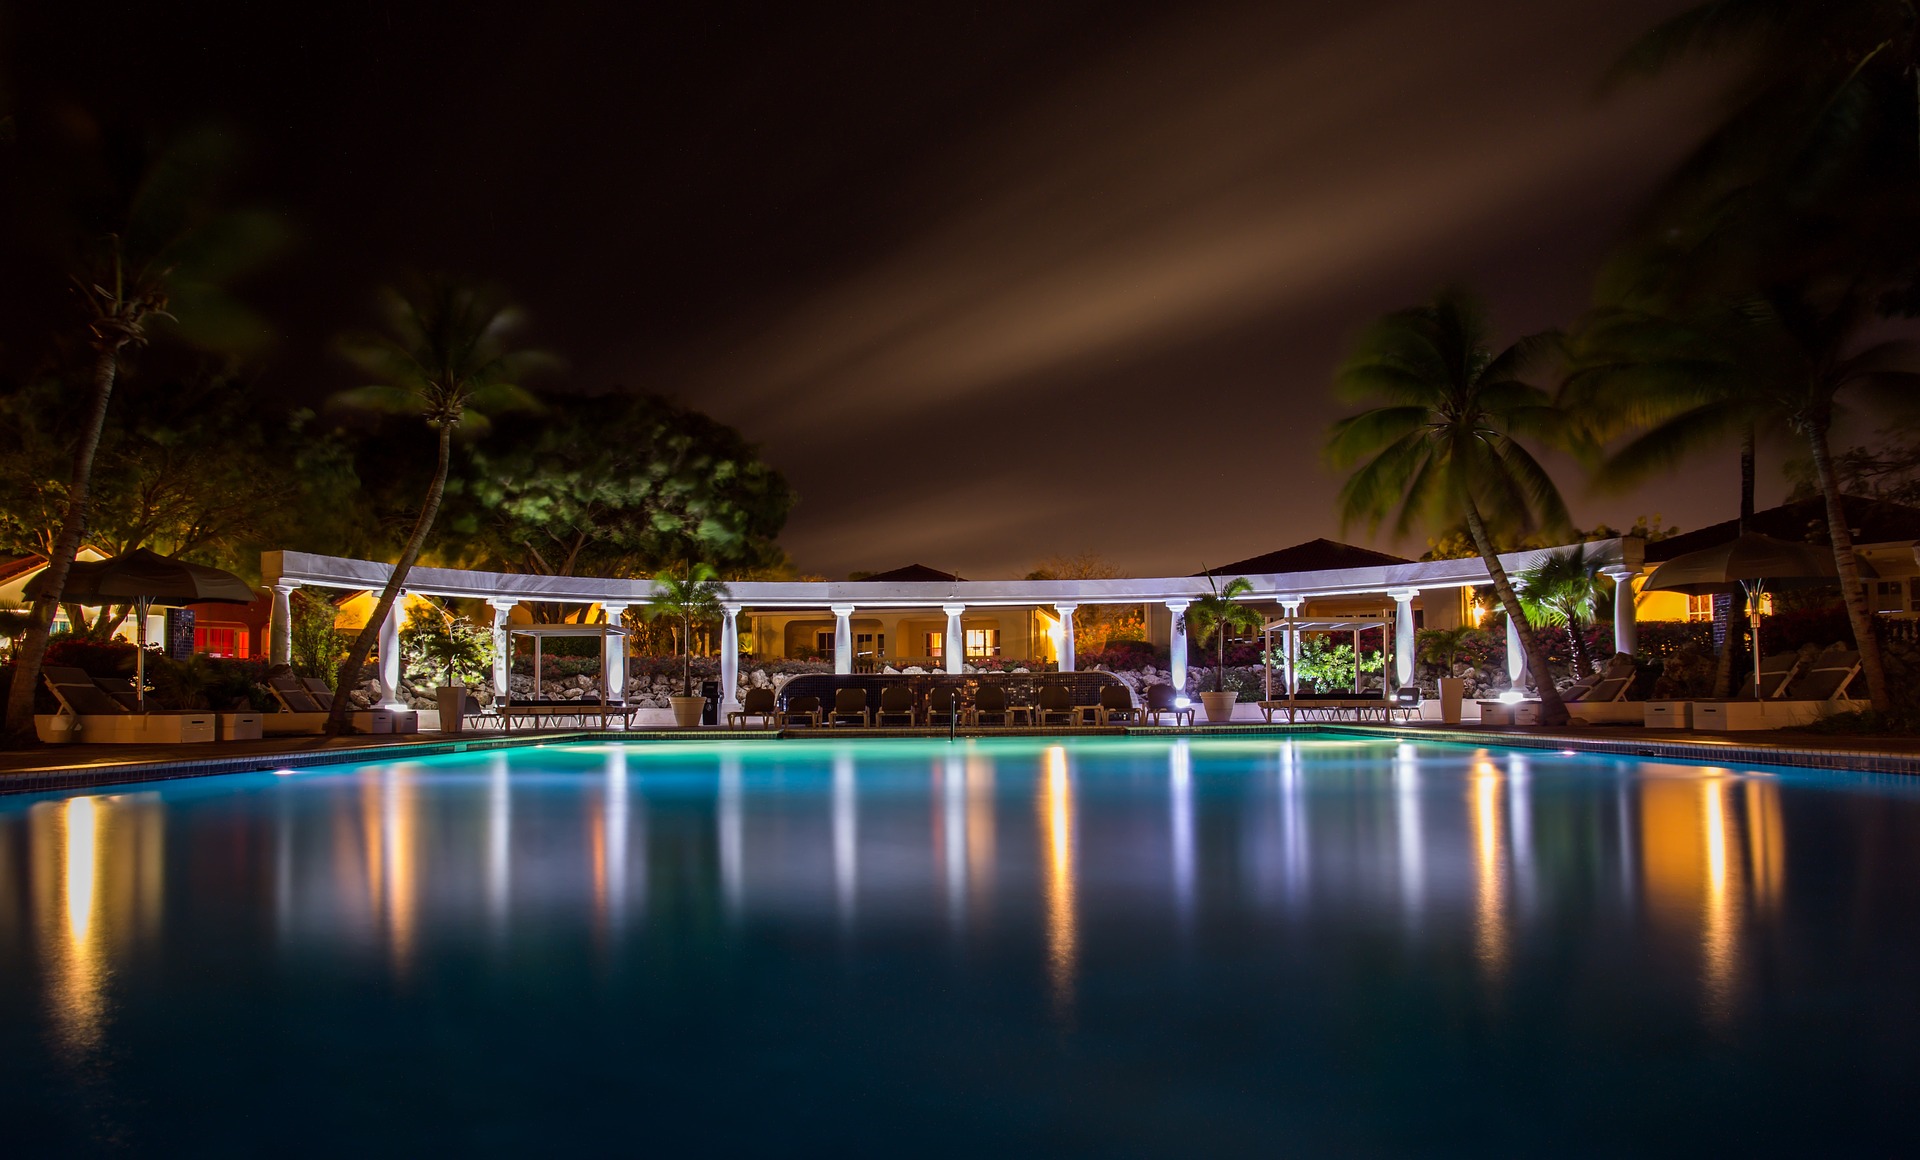 Recognizing the Luxury Hotels and Luxury Resorts